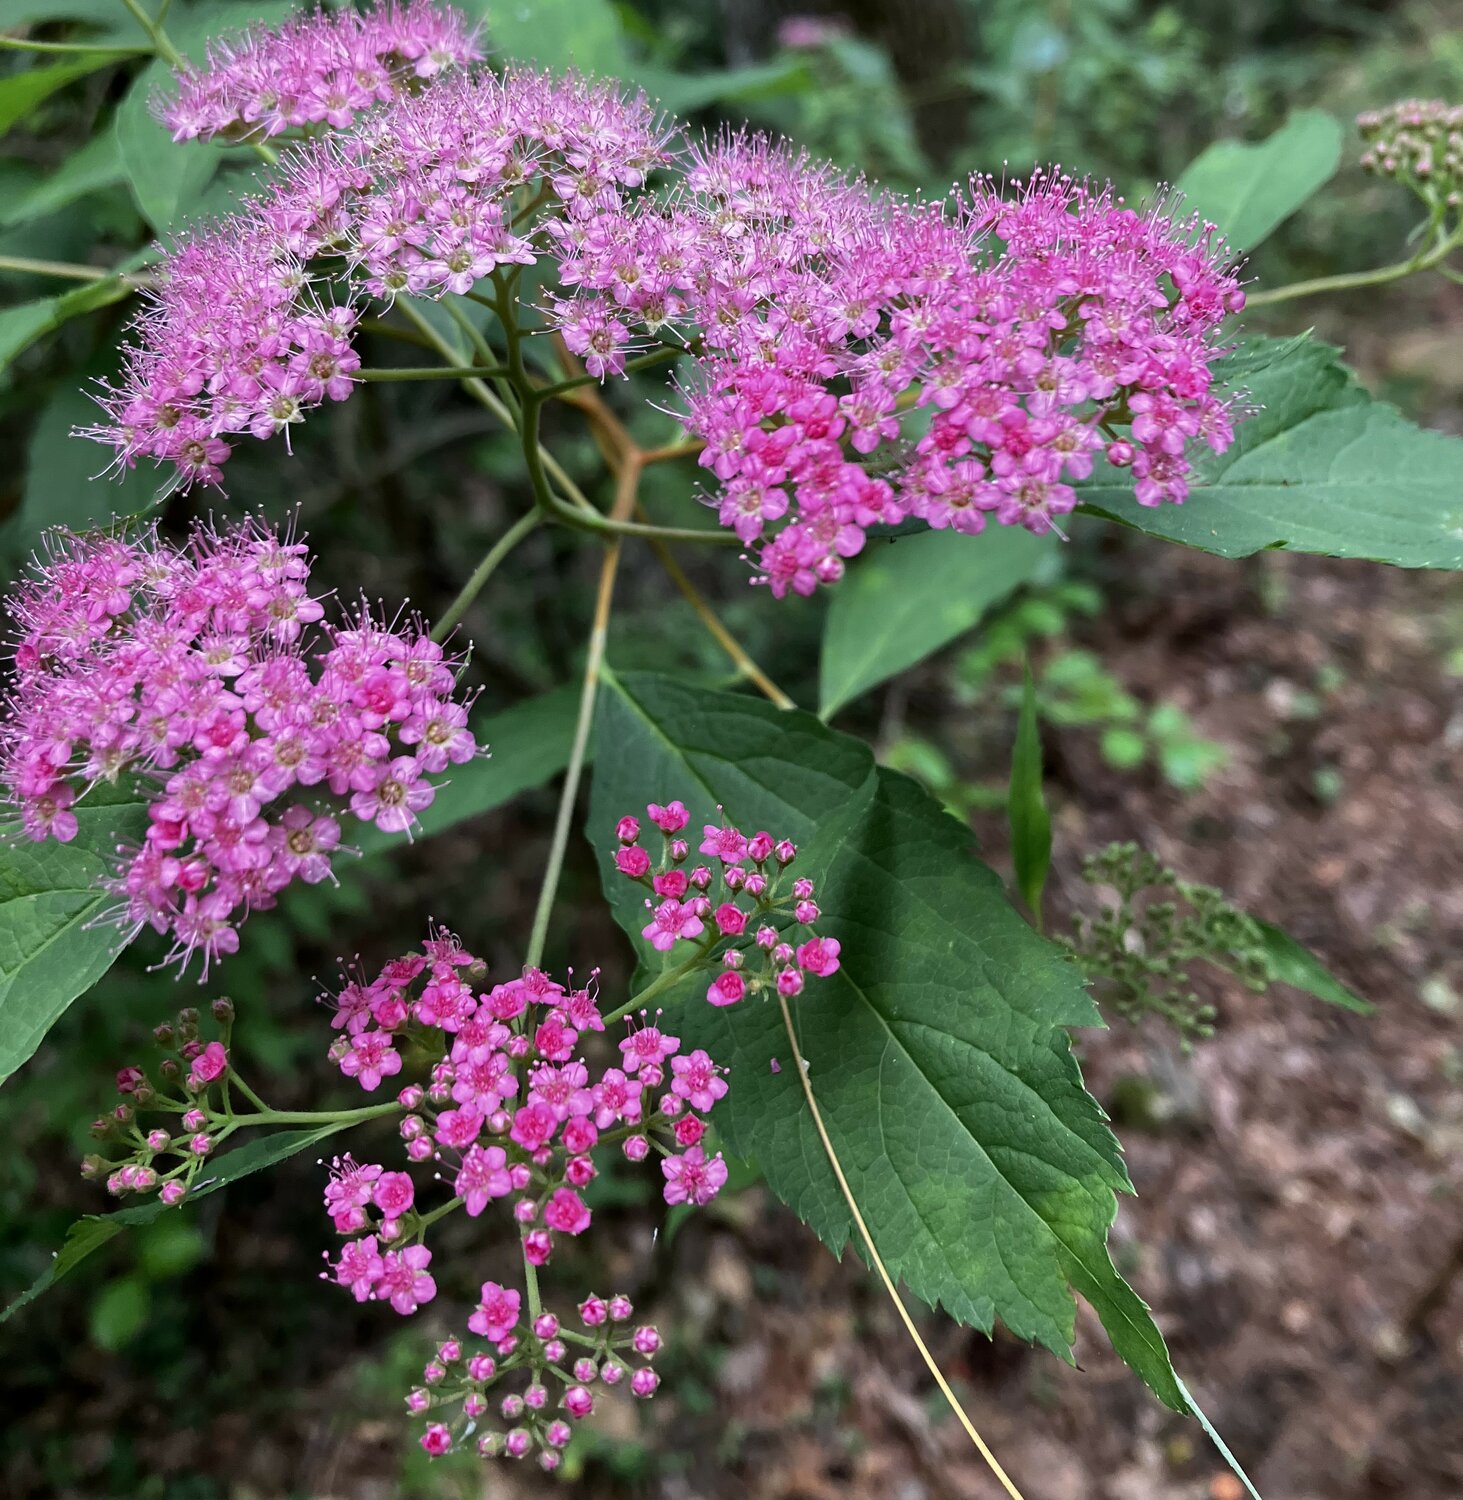 This photo of a blooming Japanese Spirea (Spiraea japonica) was taken during a hike last weekend at Valdese Lakeside Park. These plants typically bloom from May until August and can grow to be four feet tall.